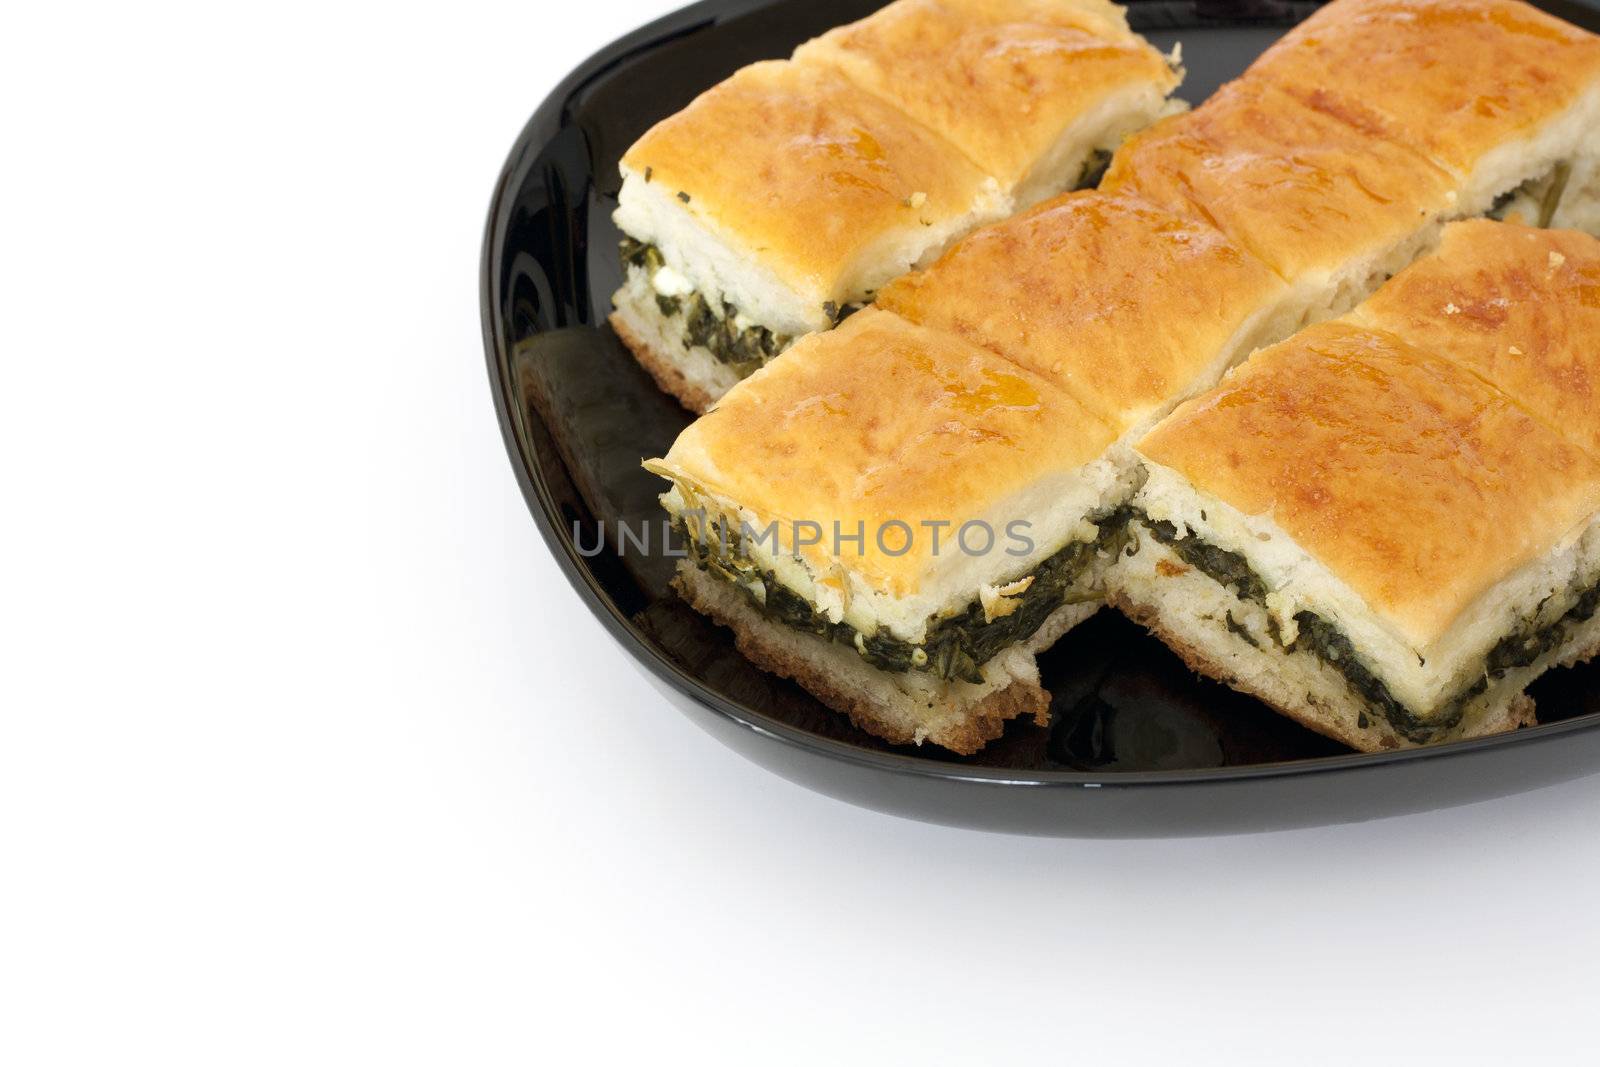 Spinach pie by magraphics